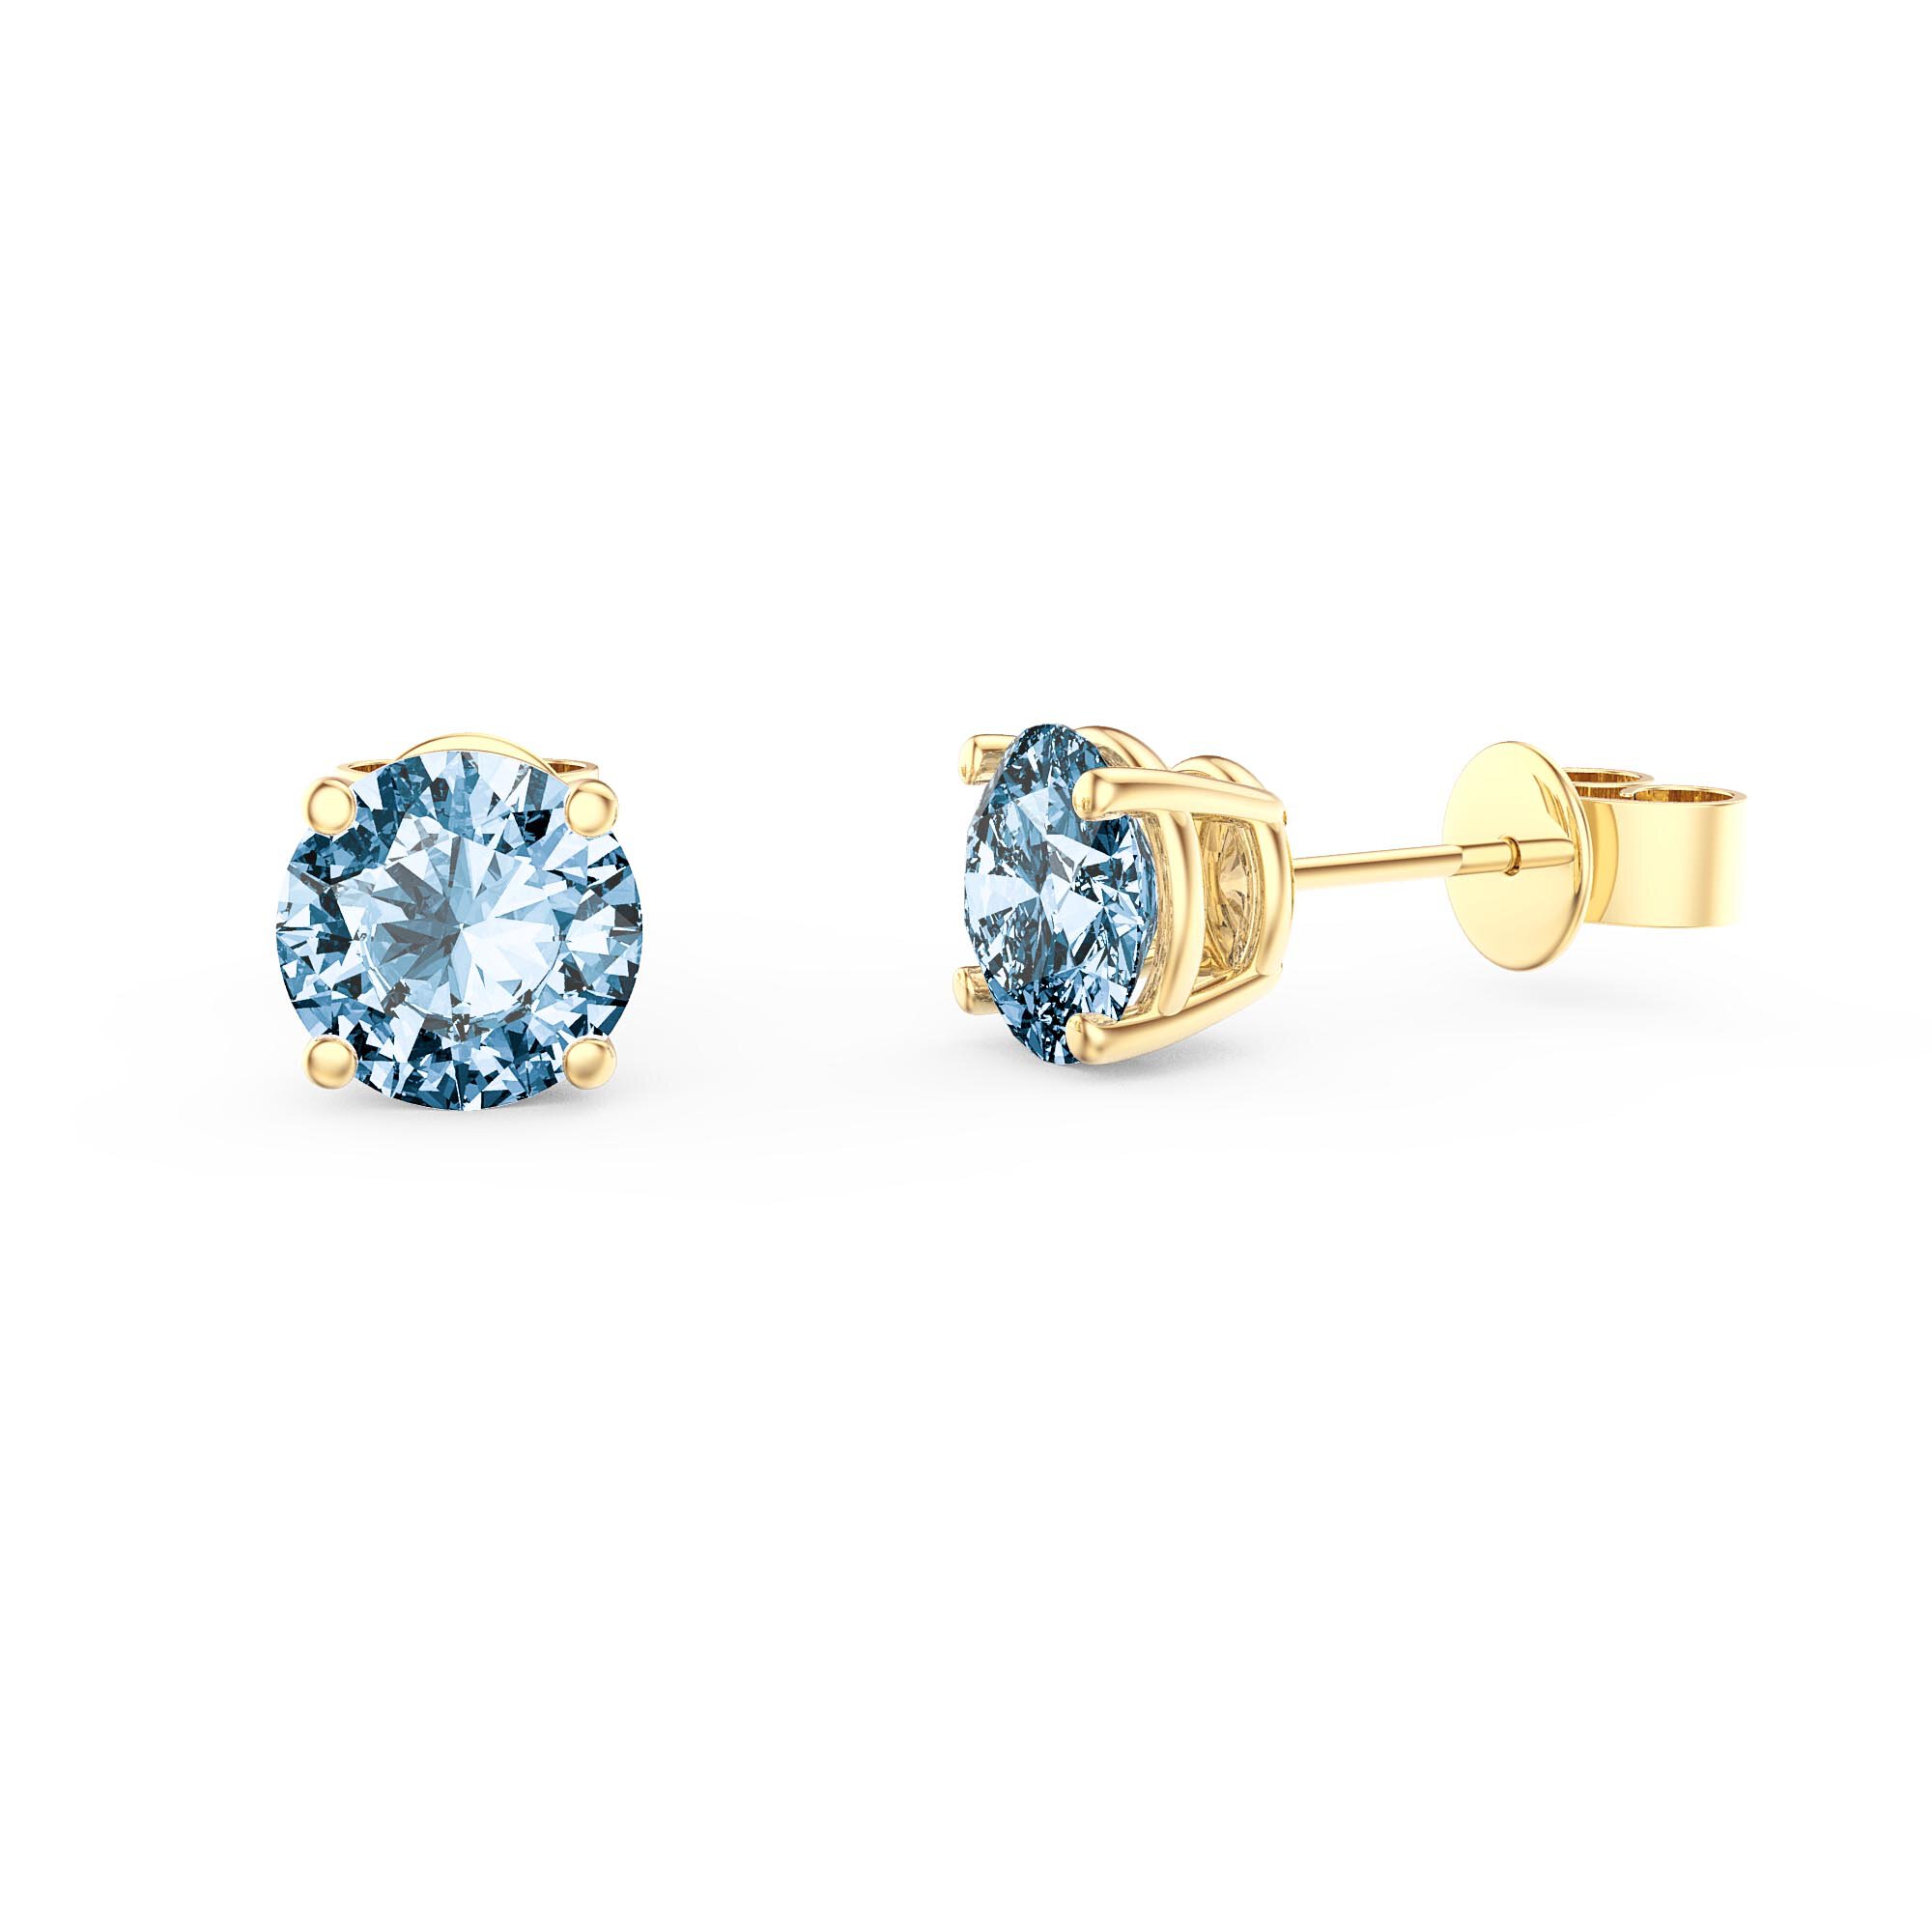 9ct Gold Blue Topaz Studs 5mm Round earrings Gift Boxed Made in UK